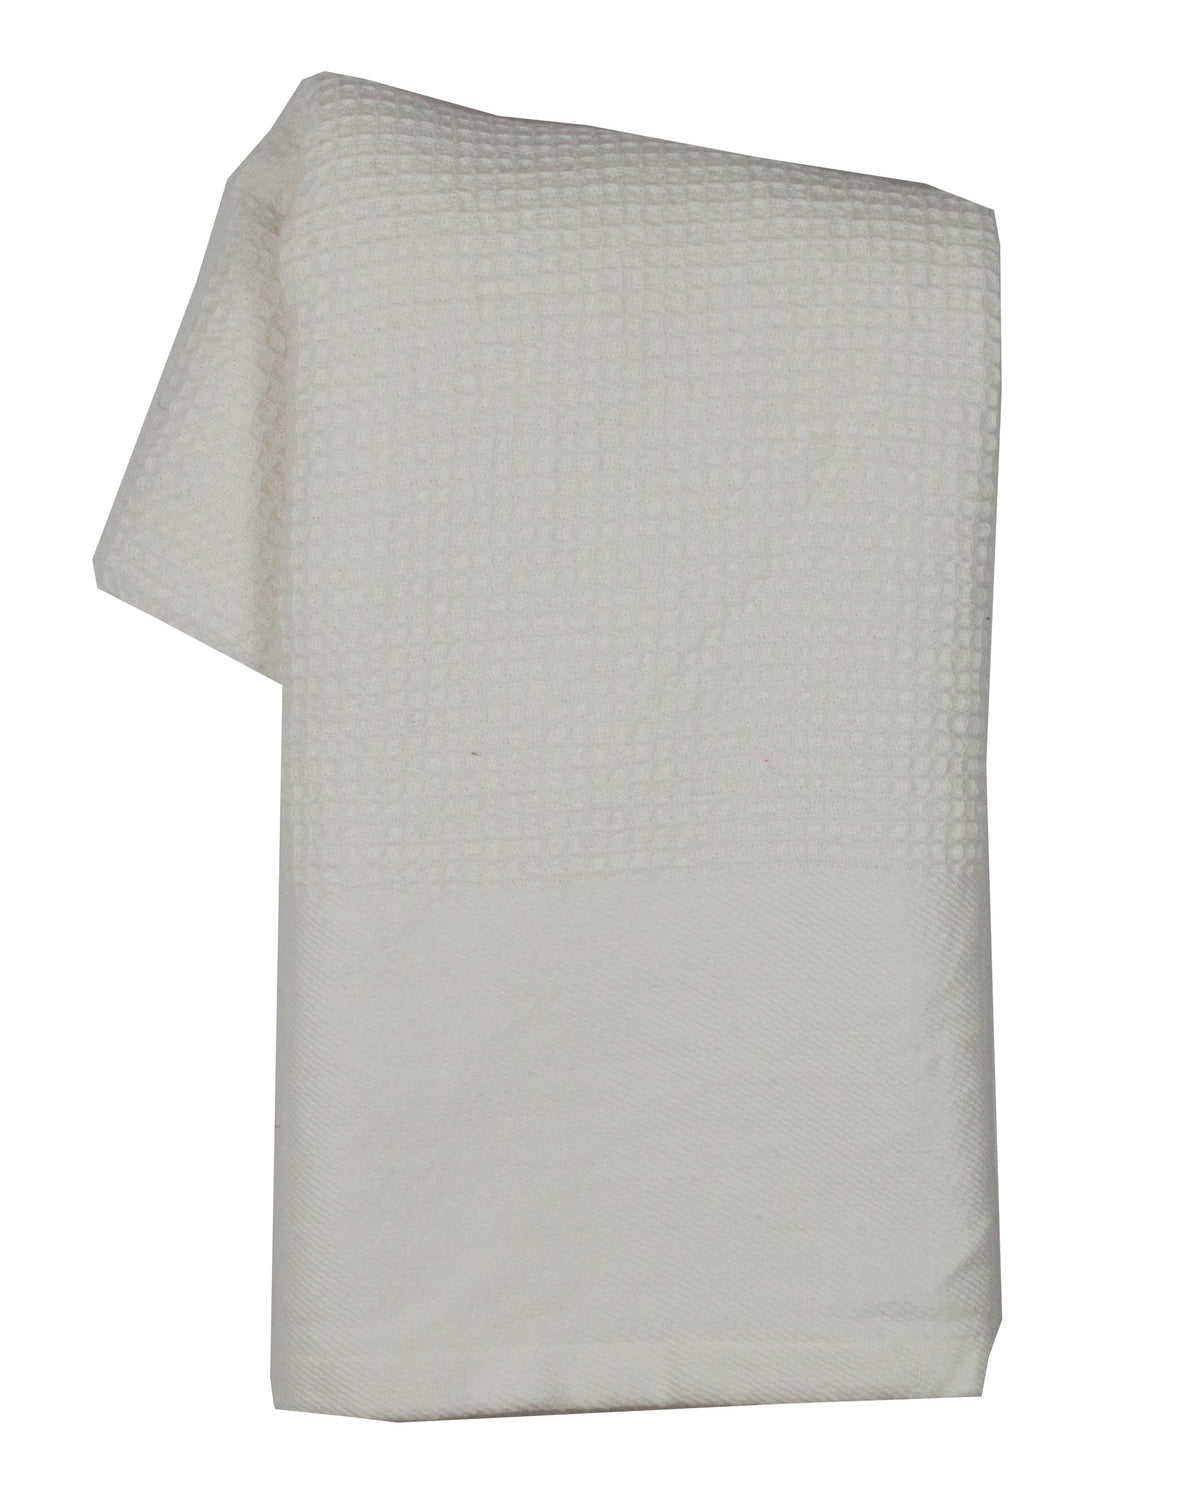 Tea Towel - Dunroven House Prewashed Waffle Weave Solid Color